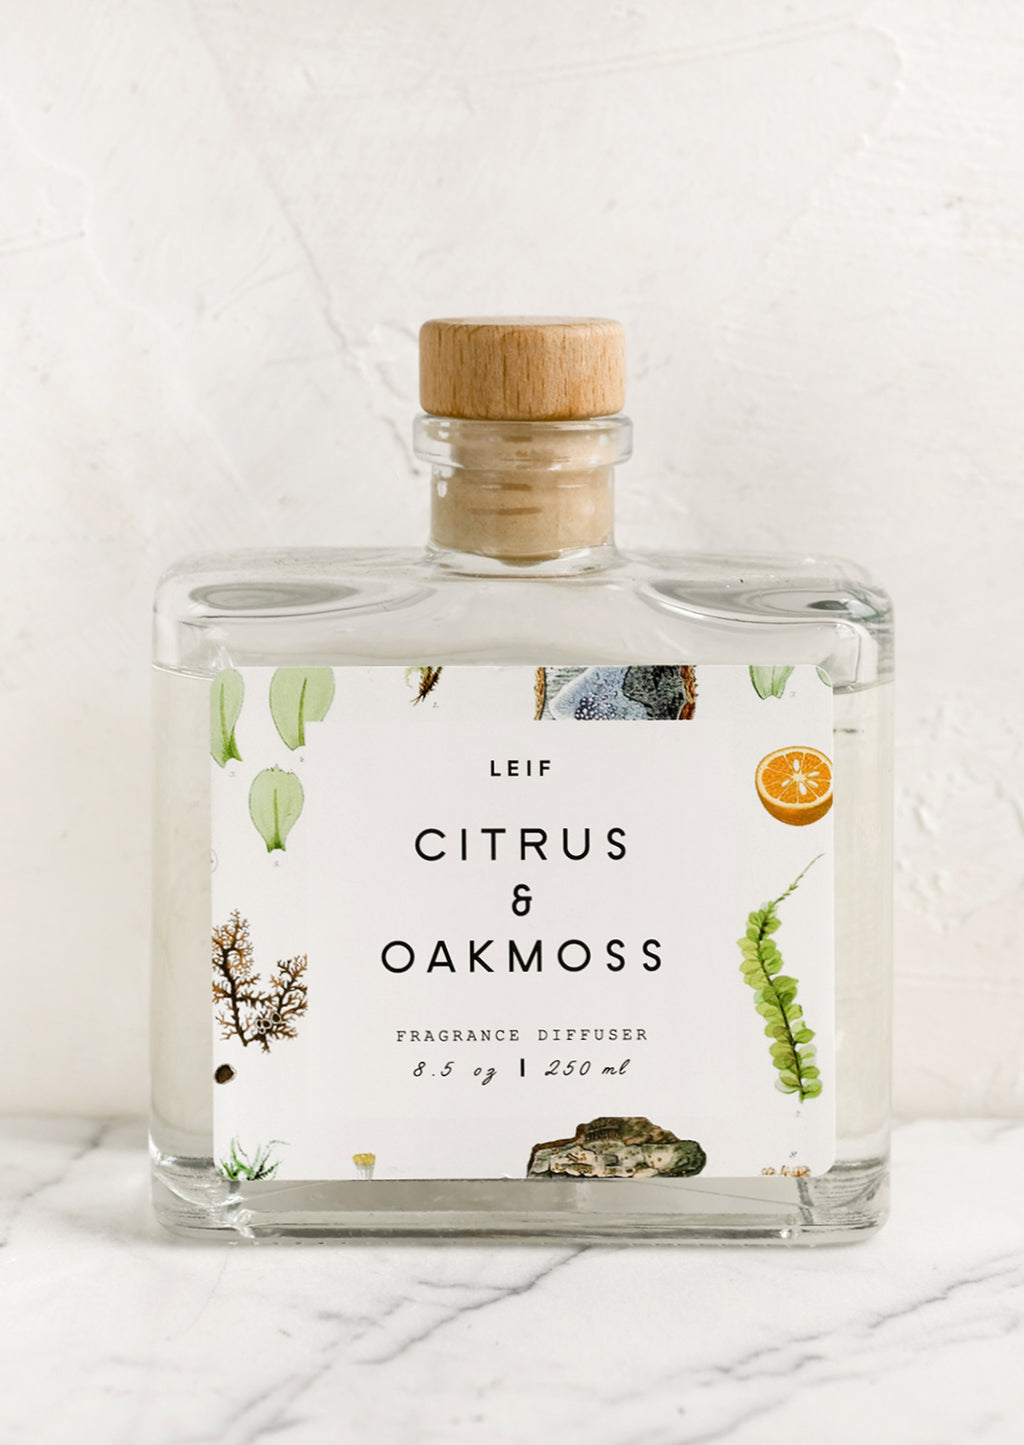 Citrus & Oakmoss: A citrus and oakmoss scented reed diffuser with glass bottle.